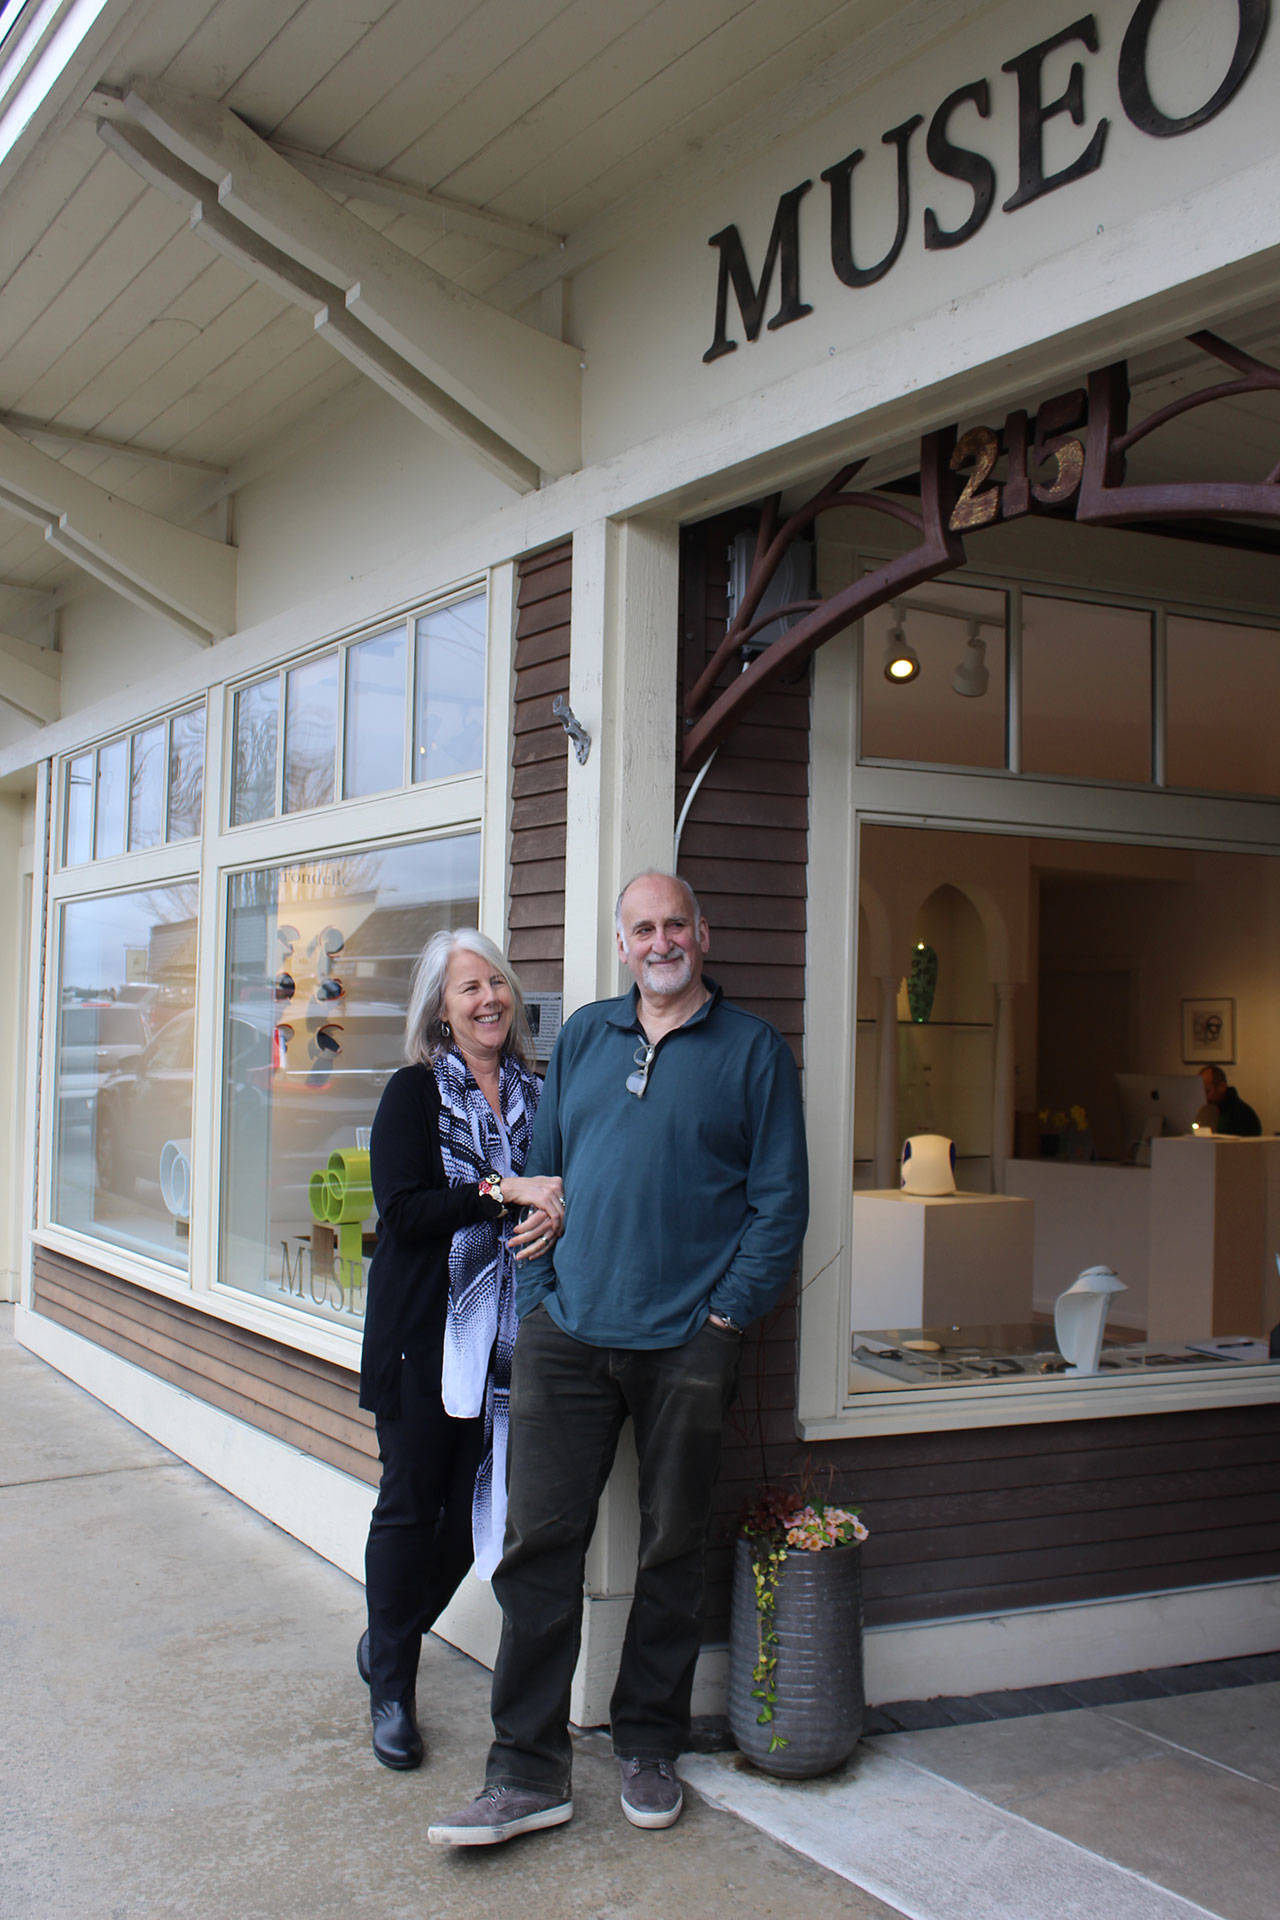 New owners of Museo, Michael Dickter and Nancy Whittaker, say the new venture is “a confluence of everything we enjoy doing.” Photos by Patricia Guthrie/Whidbey News Group